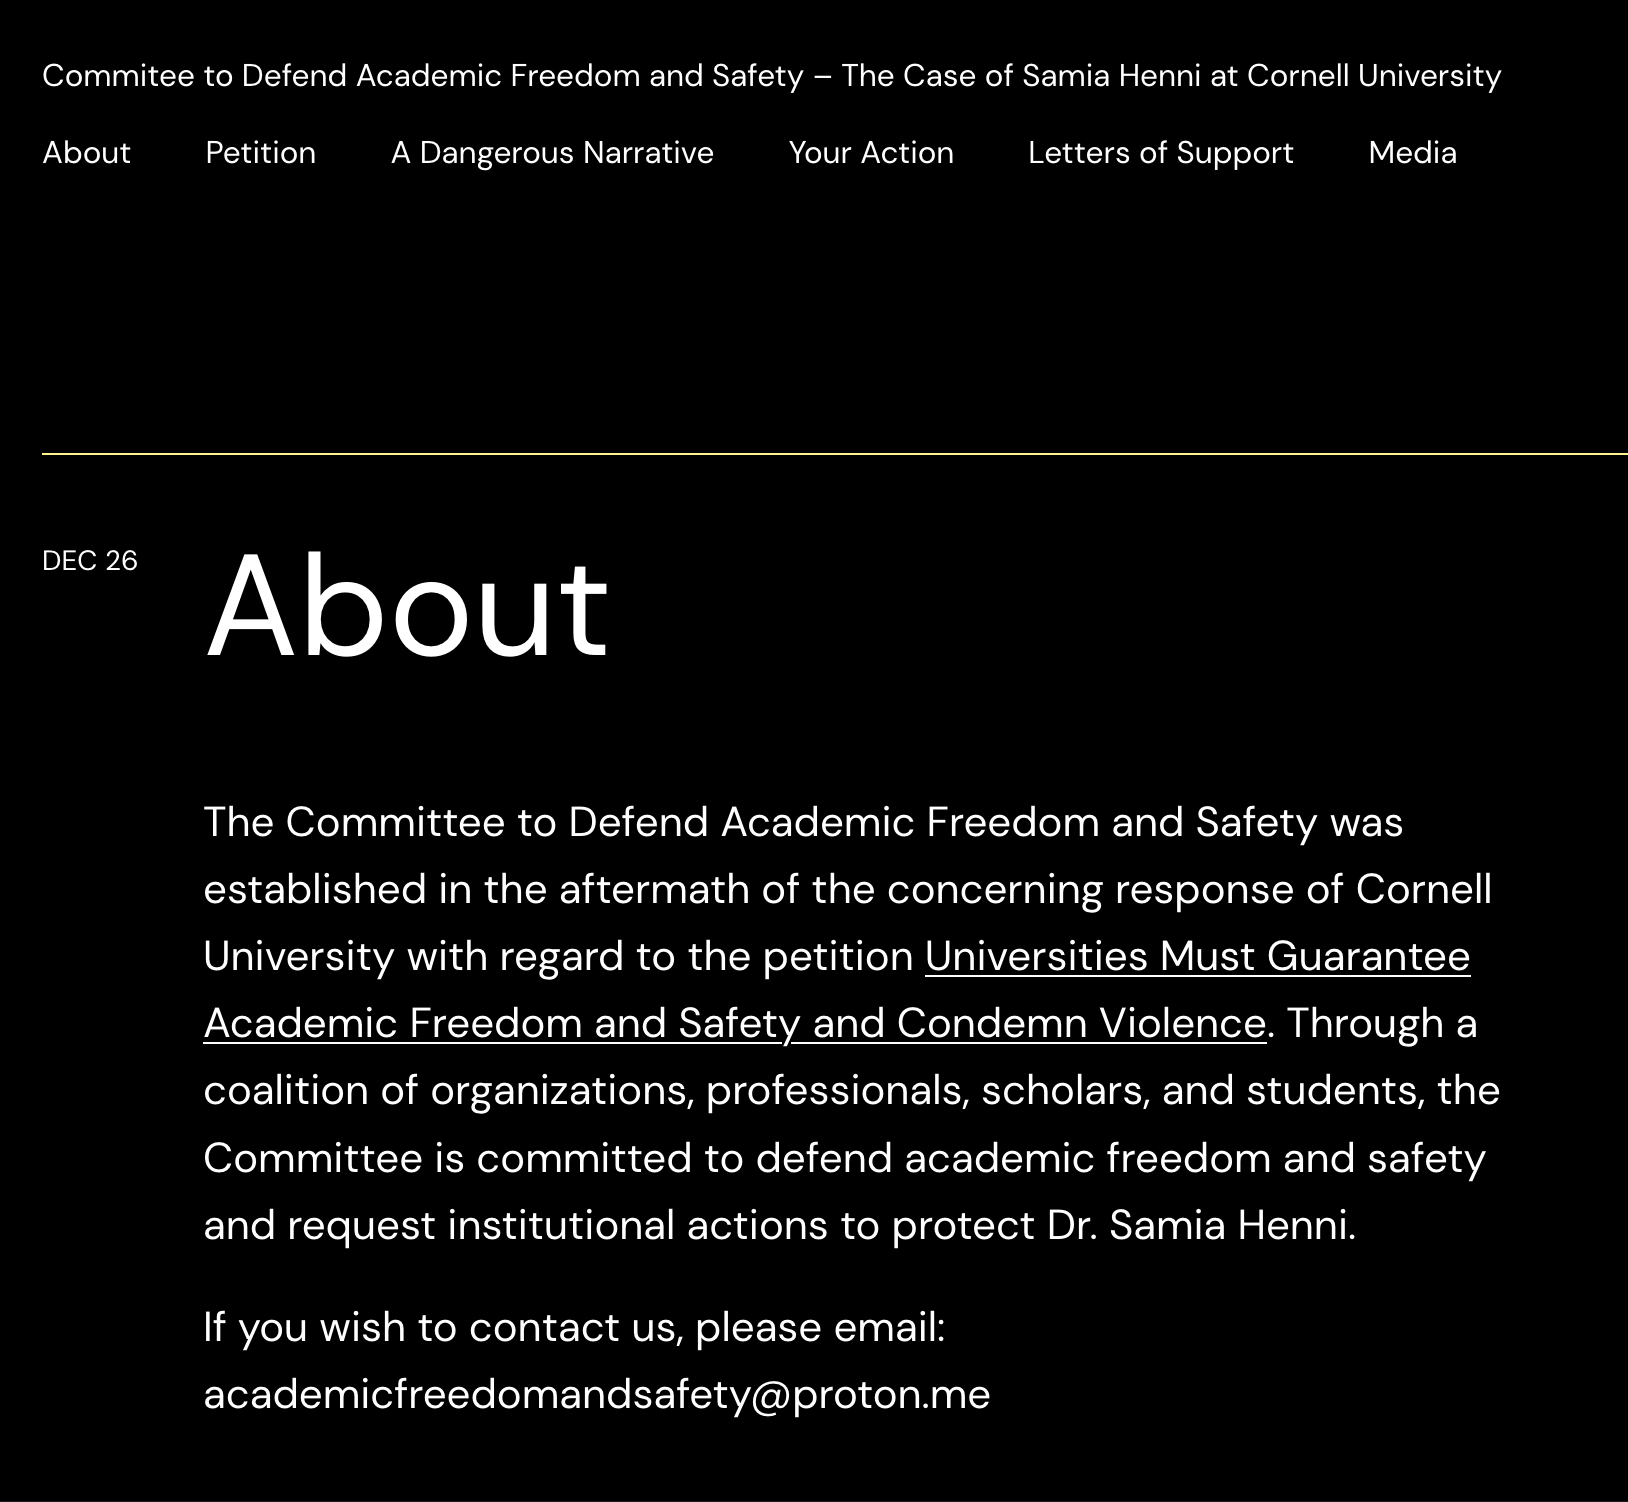 Committee to Defend Academic Freedom and Safety – The Case of Dr. Samia Henni at Cornell University